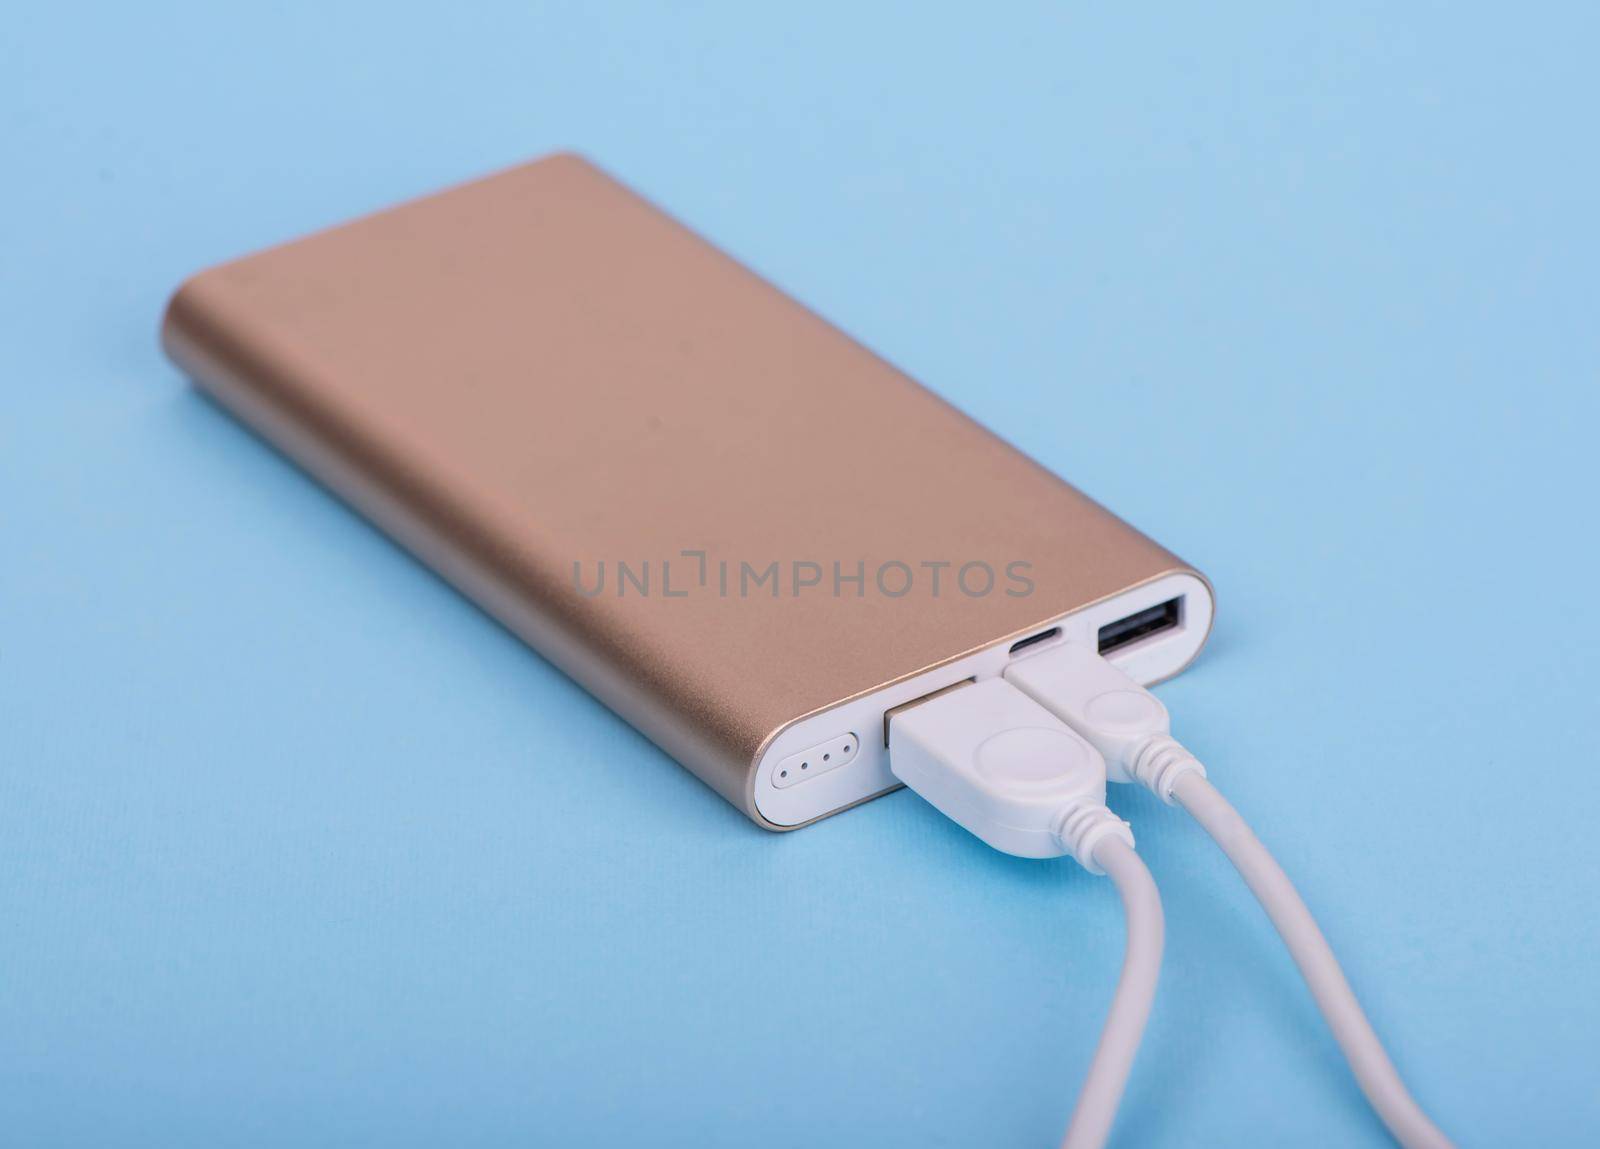 Smartphone charging with power bank on a blue background.